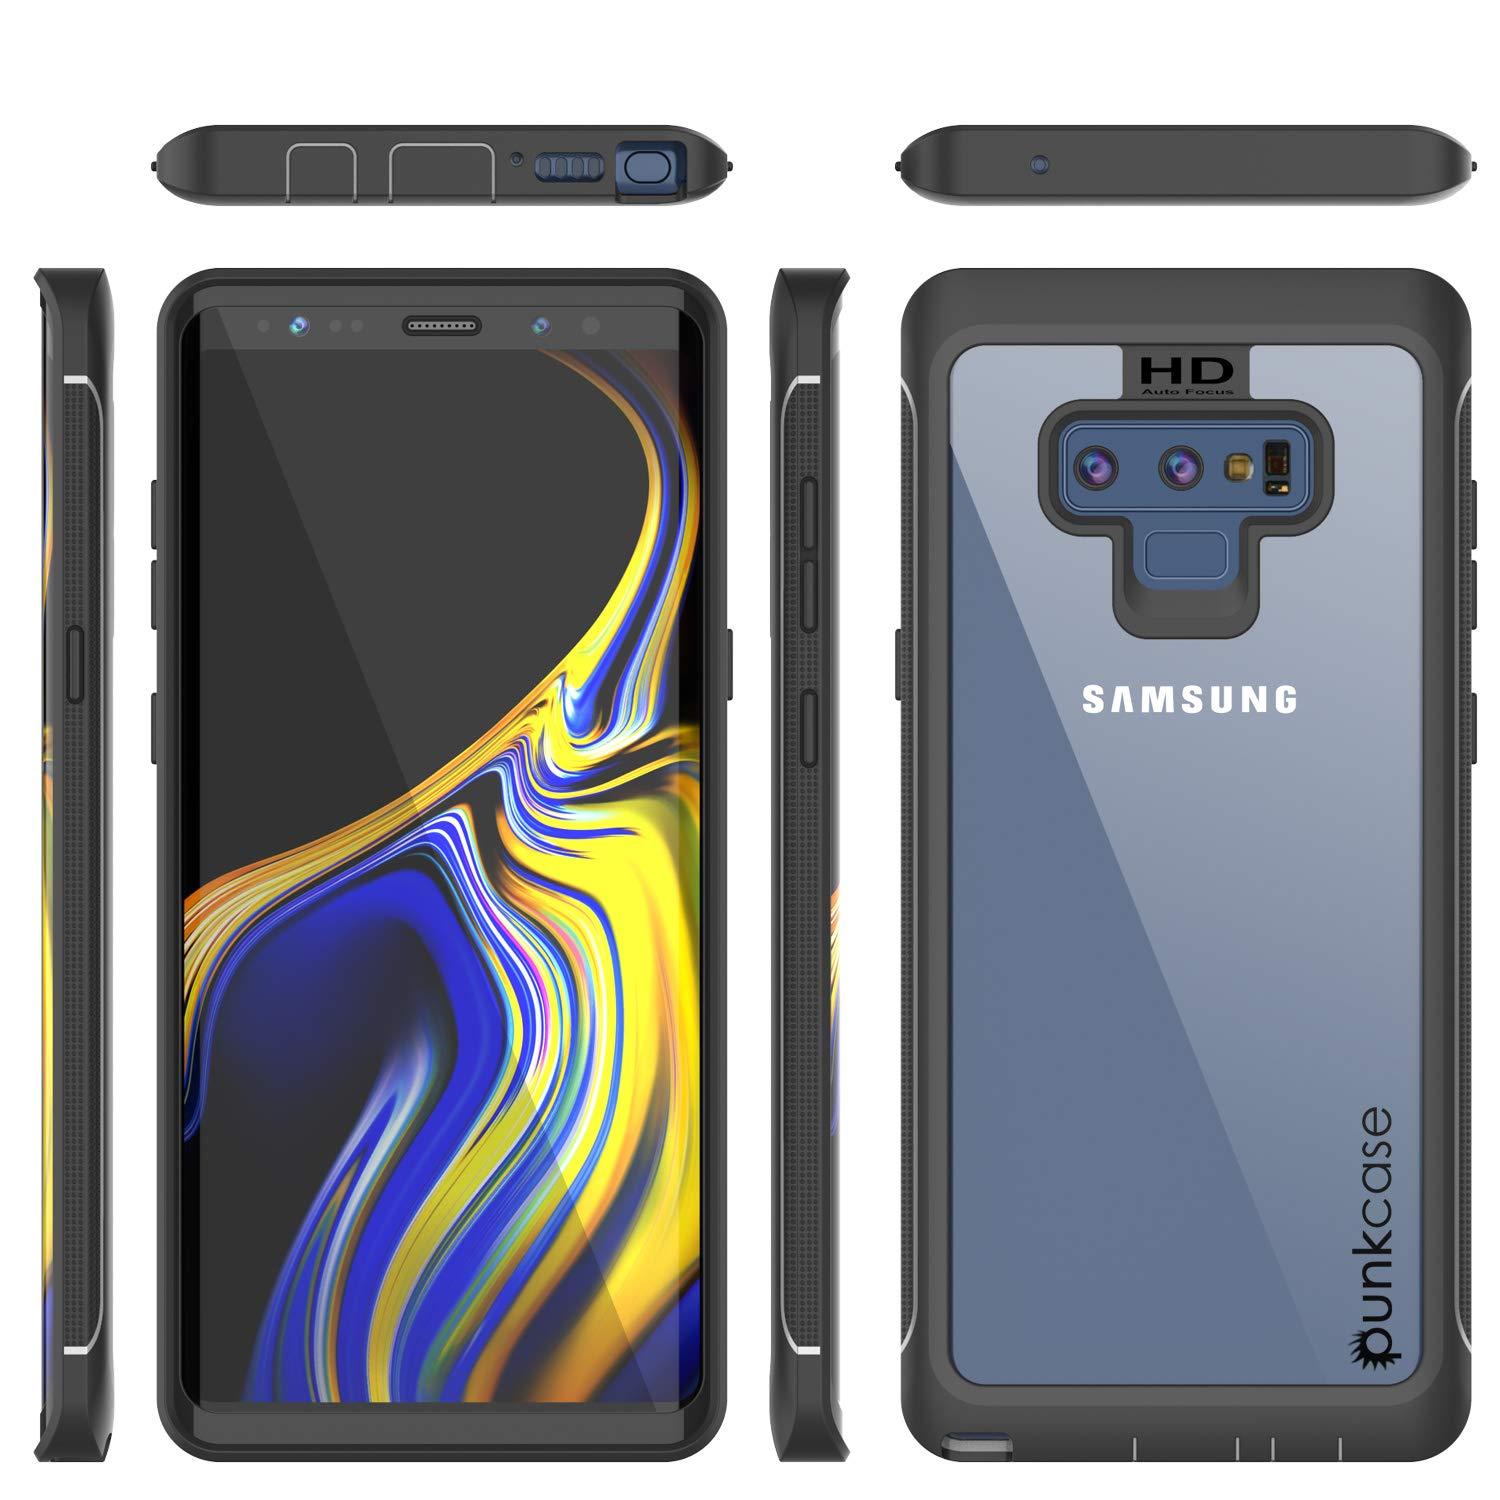 Punkcase Galaxy Note 9 Case, [Spartan Series] Black Rugged Heavy Duty Cover W/Built in Screen Protector